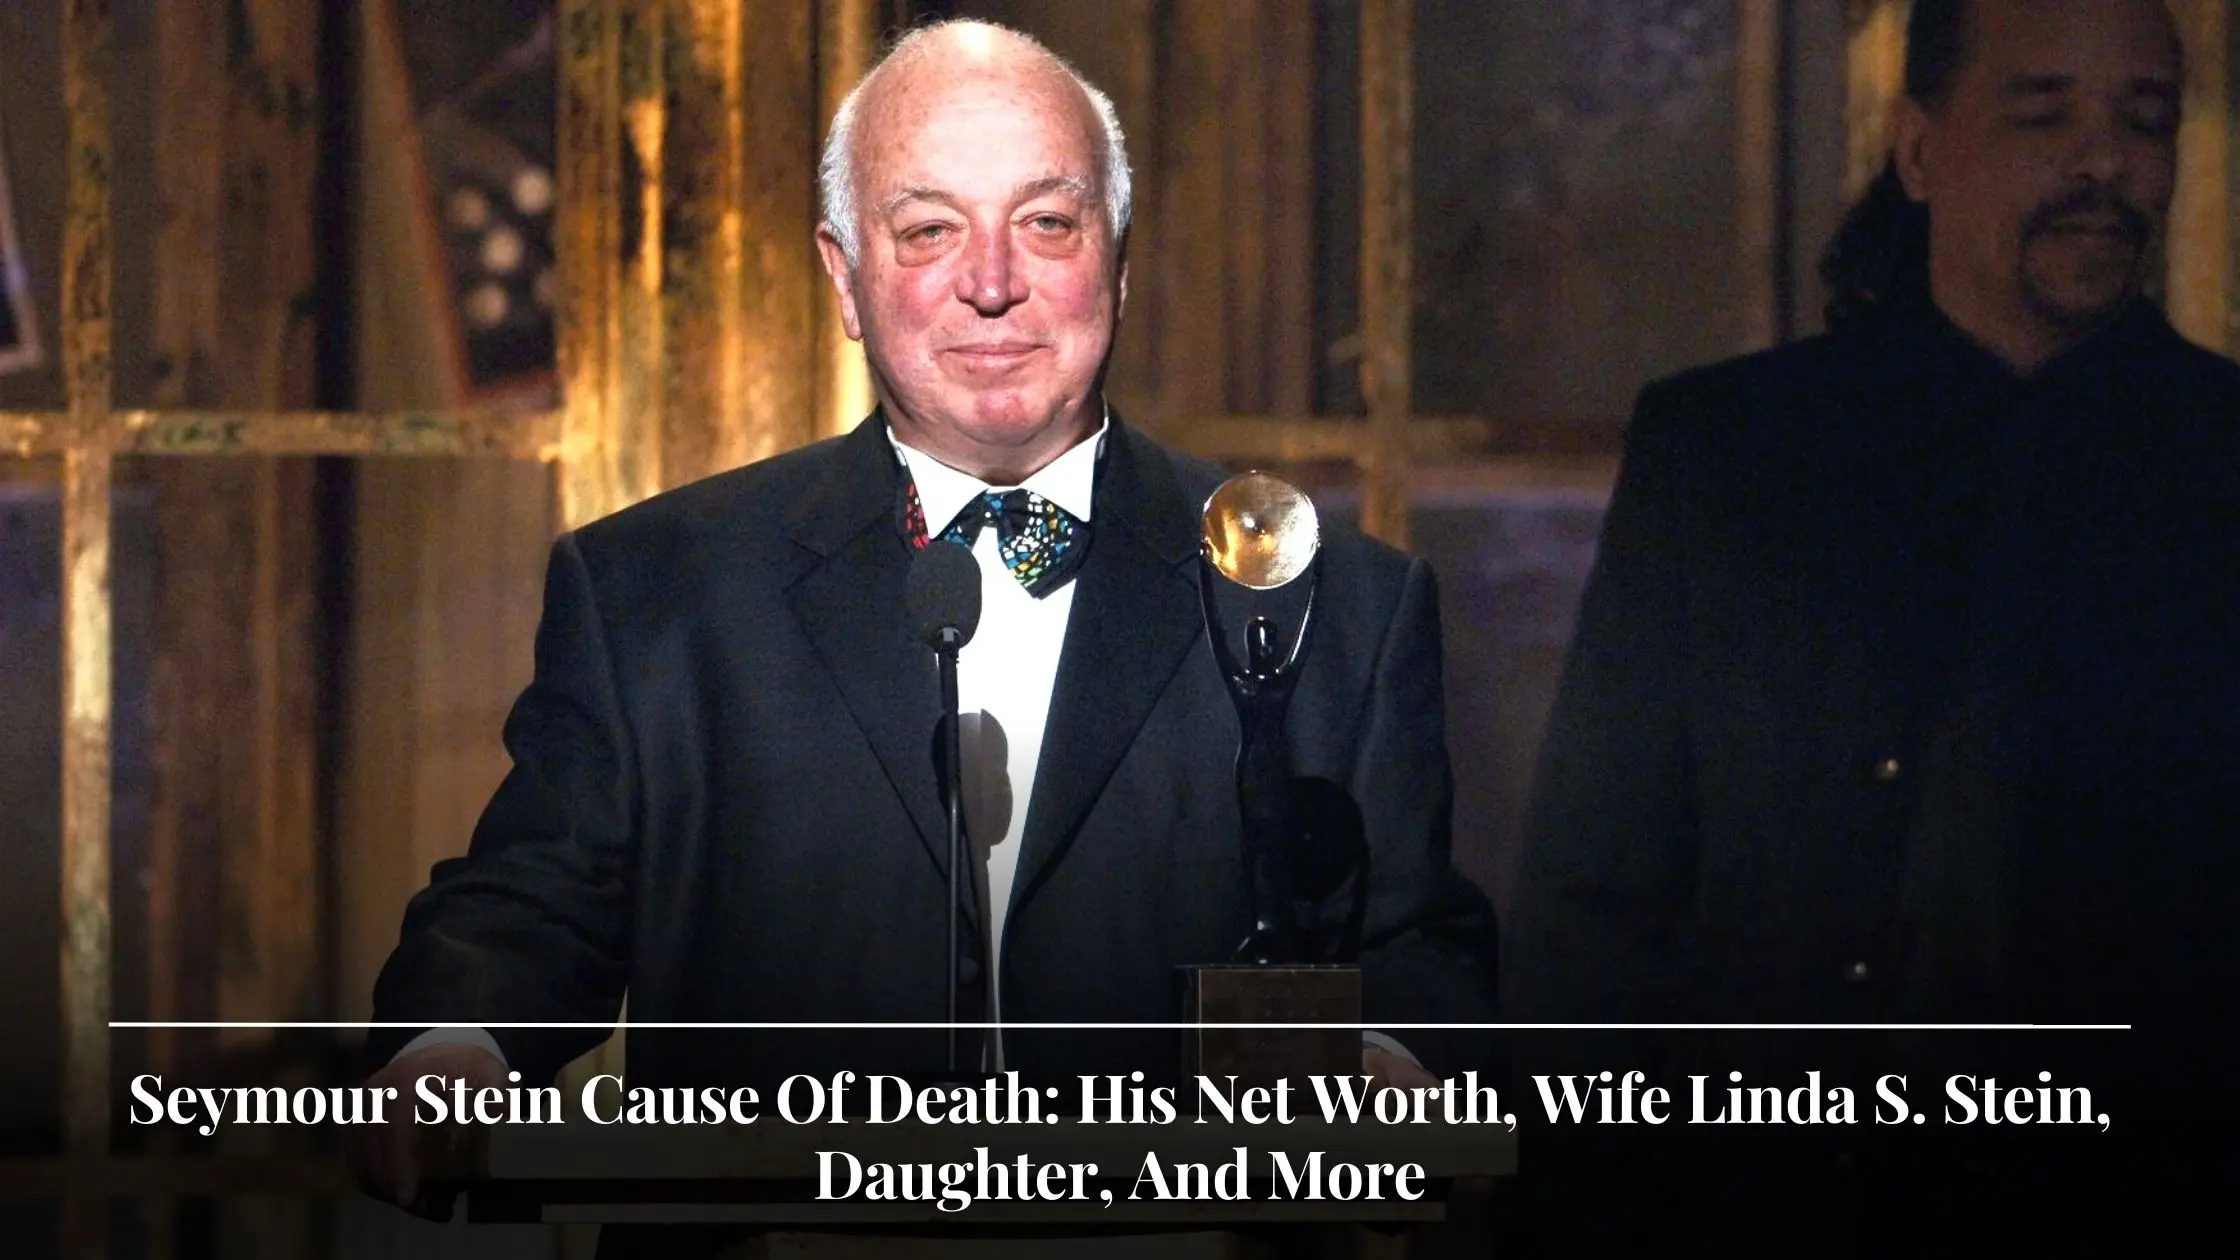 Seymour Stein Cause Of Death His Net Worth, Wife Linda S. Stein, Daughter, And More